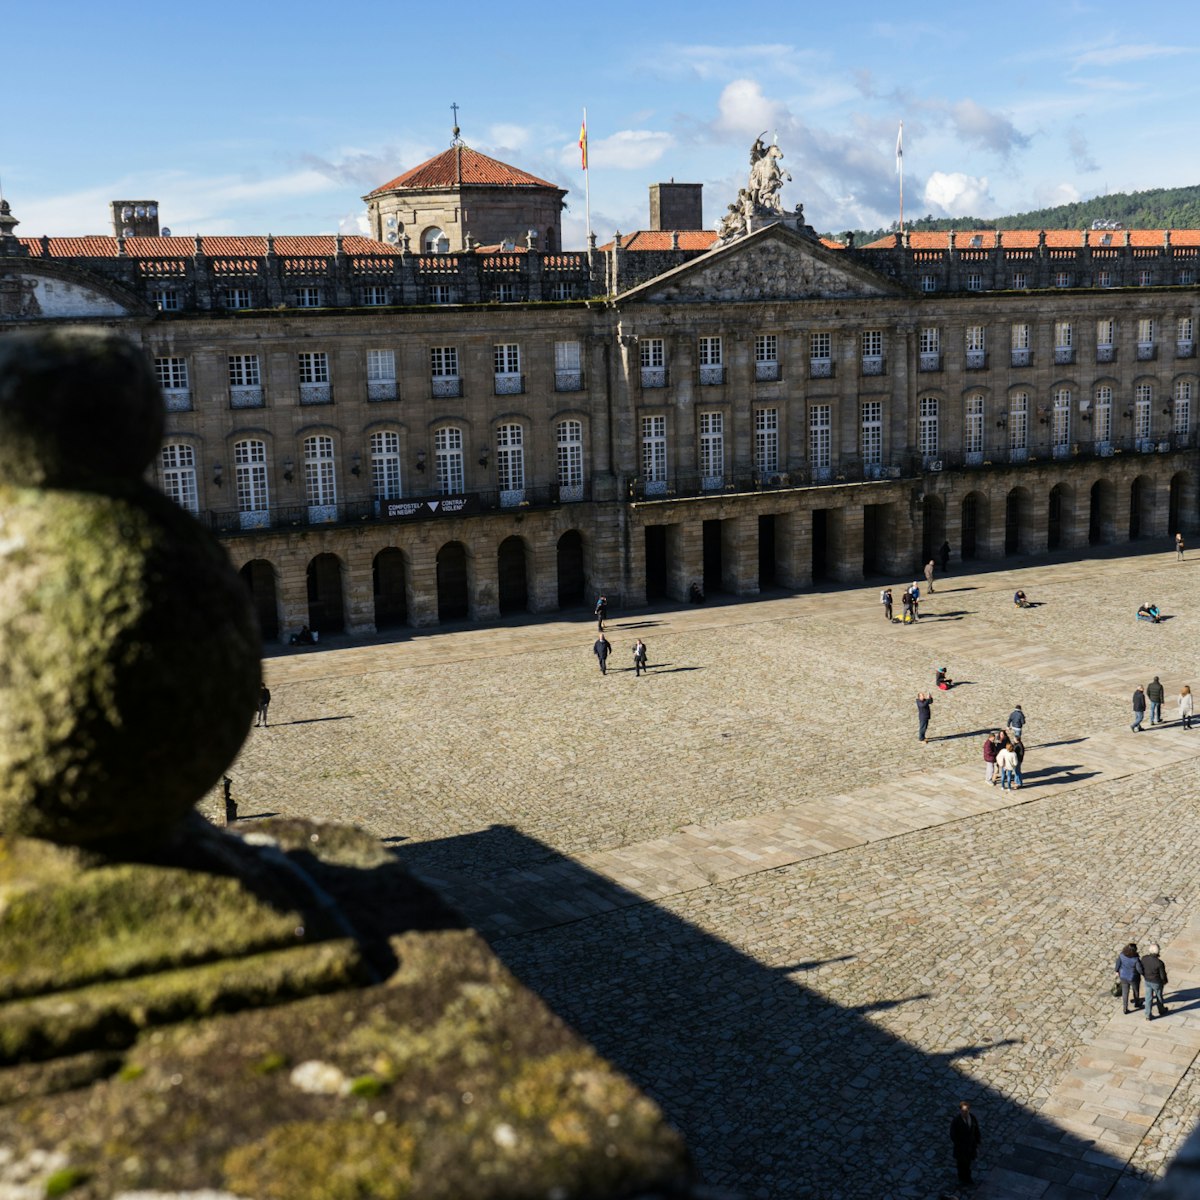 Praza do Obradoiro, Santiago De Compostela; Shutterstock ID 531550018; Your name (First / Last): Tom Stainer; GL account no.: 65050 ; Netsuite department name: Online Editorial ; Full Product or Project name including edition: Best in Europe 2017